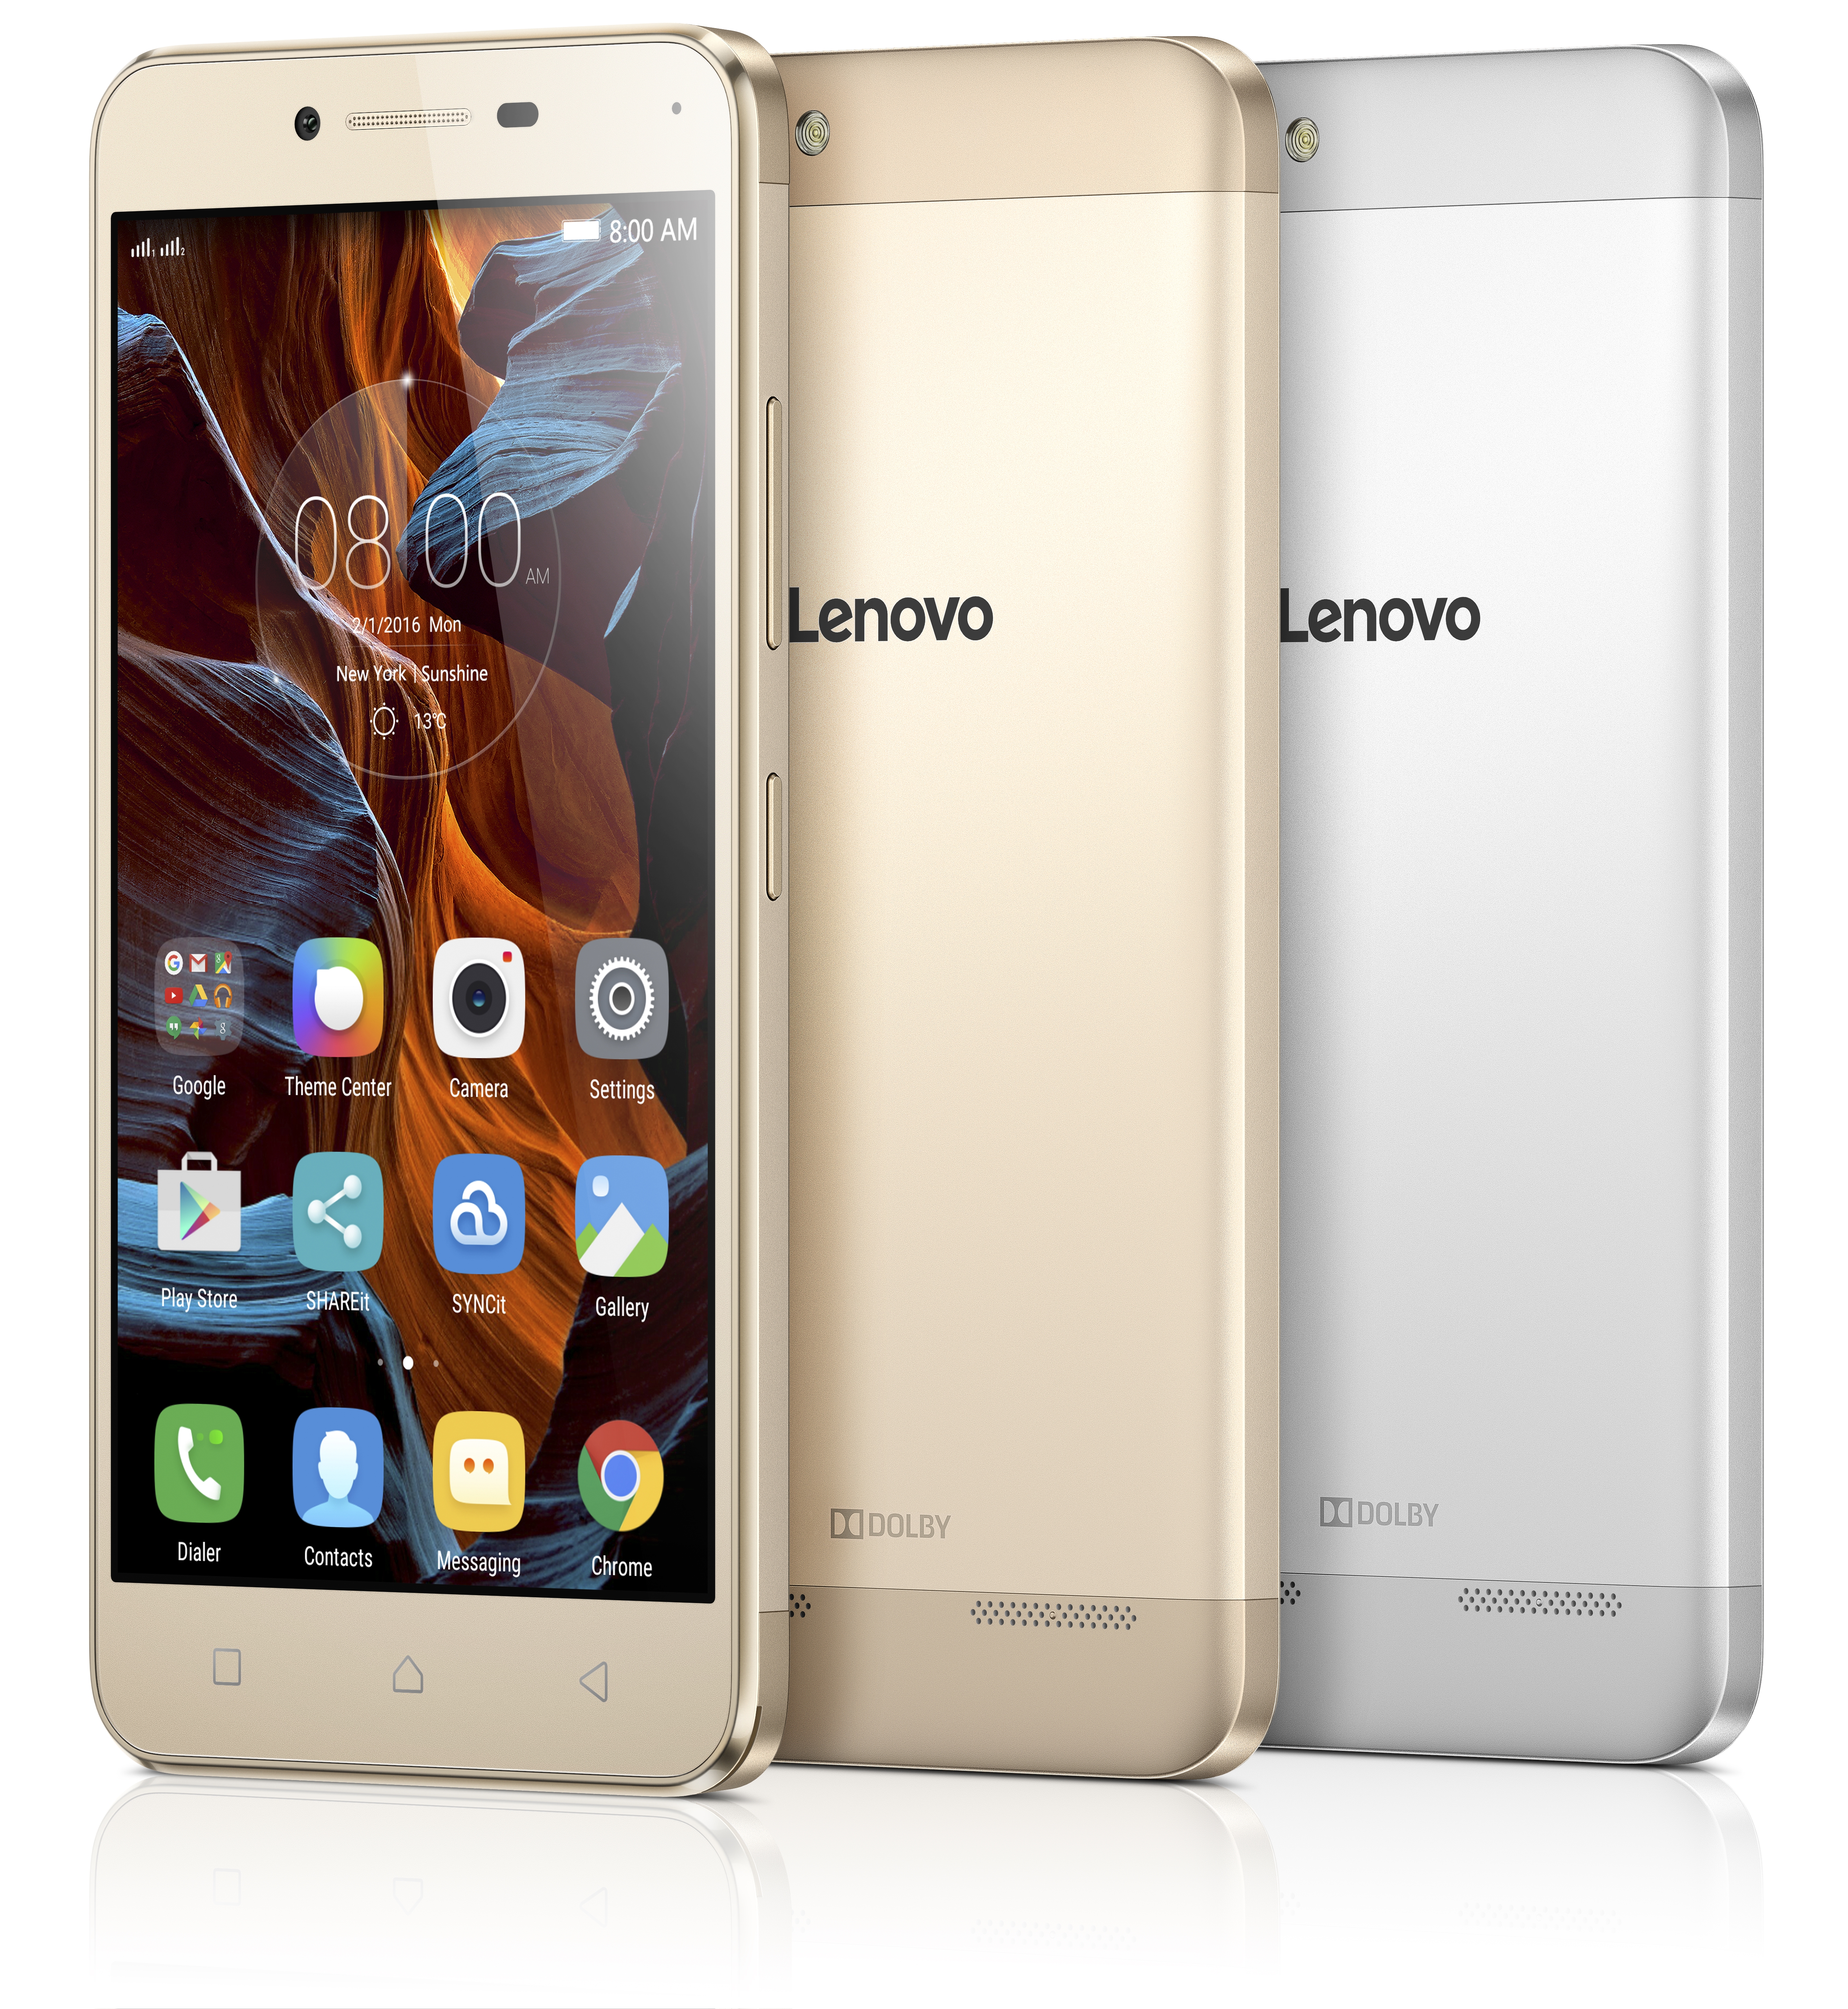 Lenovo unveiled the new Vibe K5 and K5 Plus mid-rangers